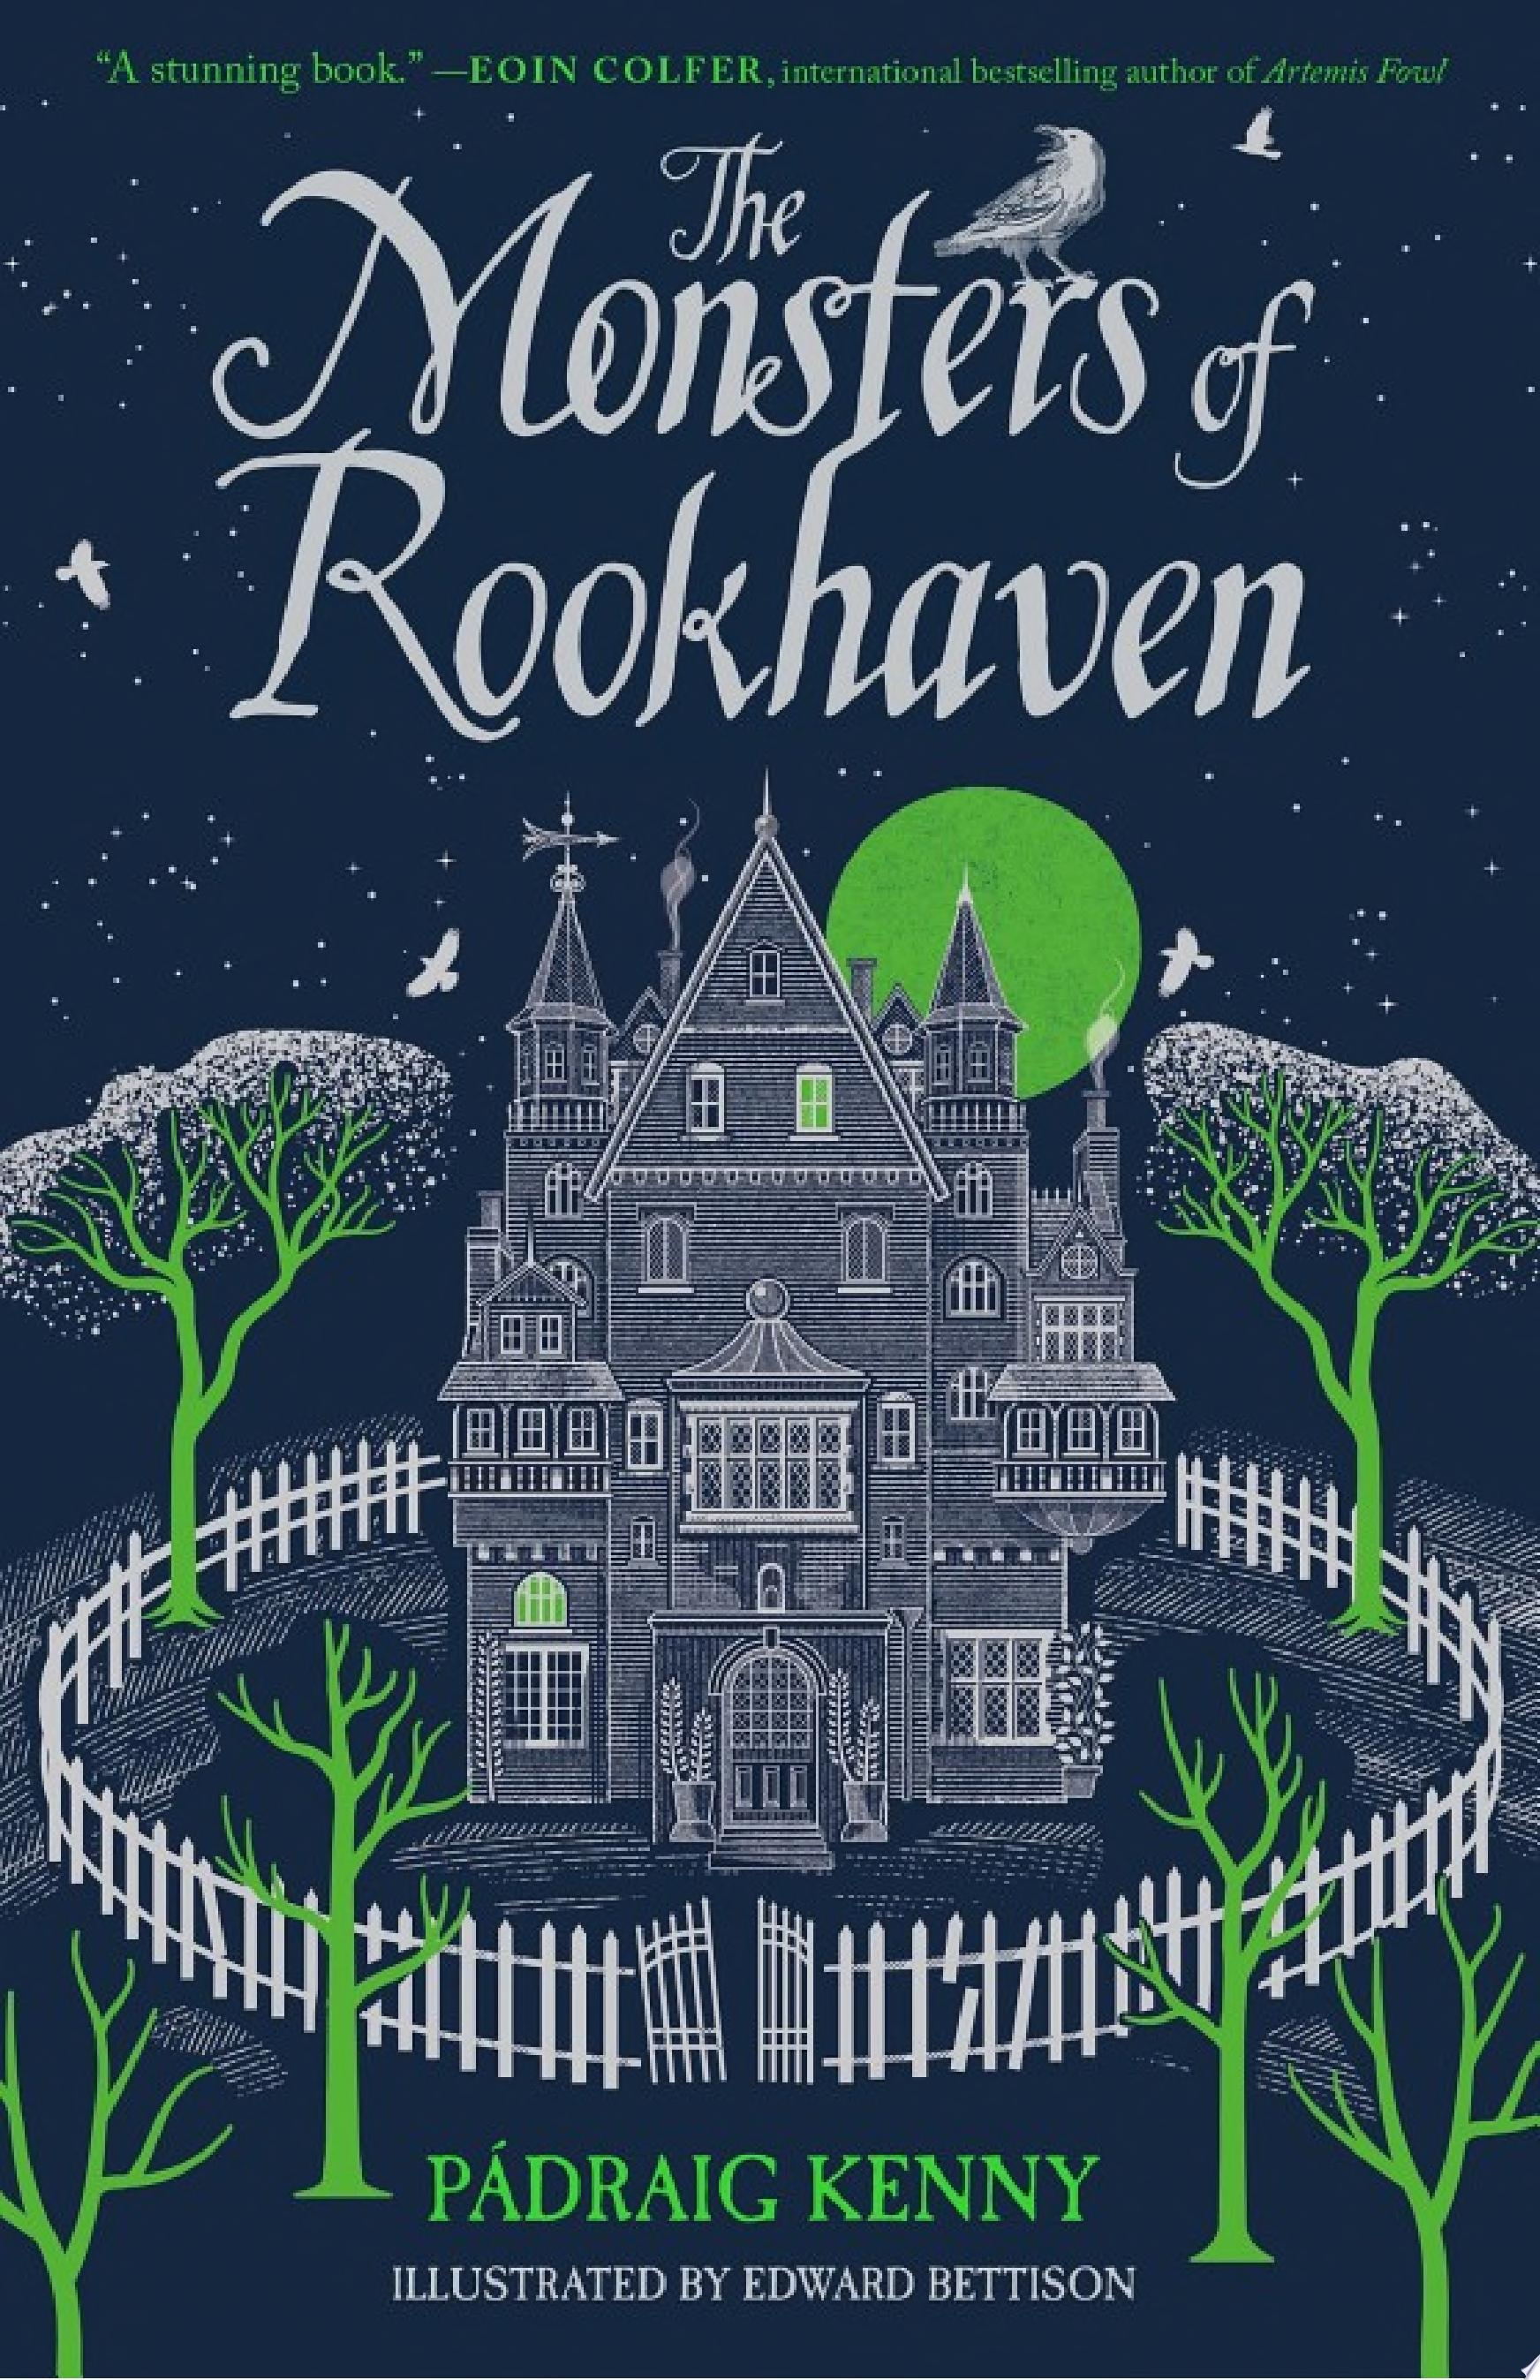 Image for "The Monsters of Rookhaven"